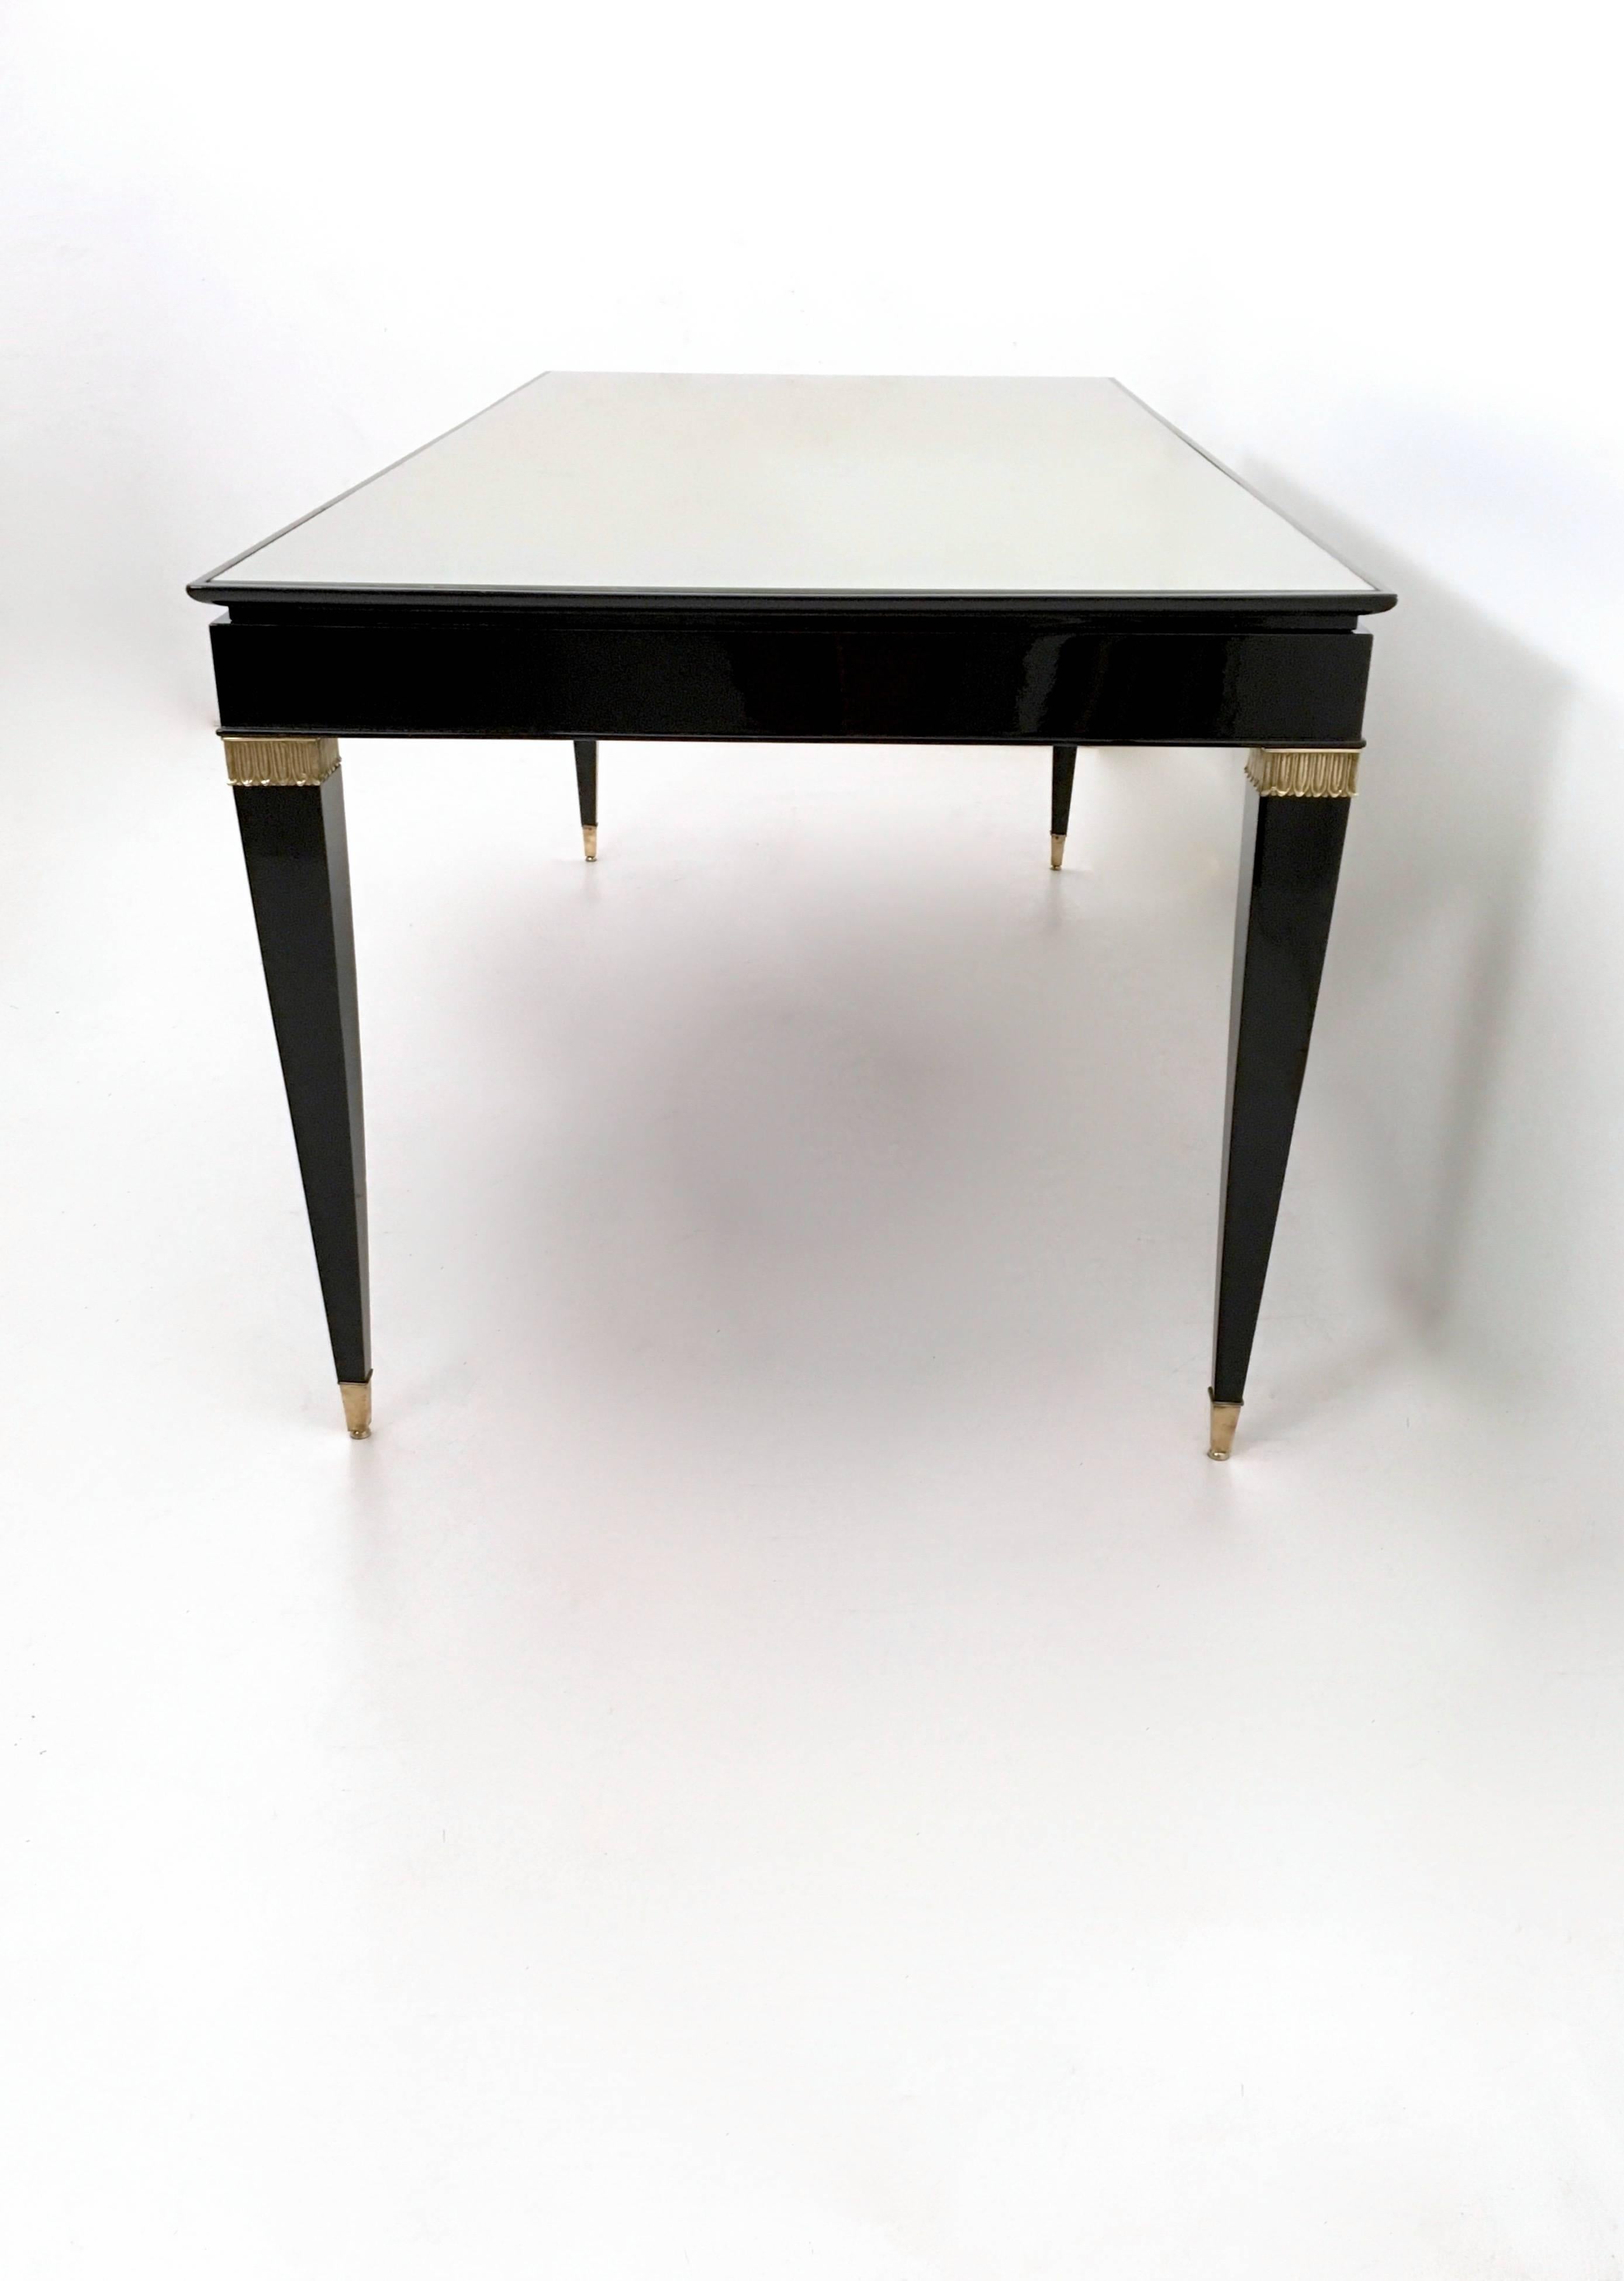 Vintage Lacquered Beech Dining Table by Paolo Buffa with Taupe Glass Top, Italy In Excellent Condition For Sale In Bresso, Lombardy